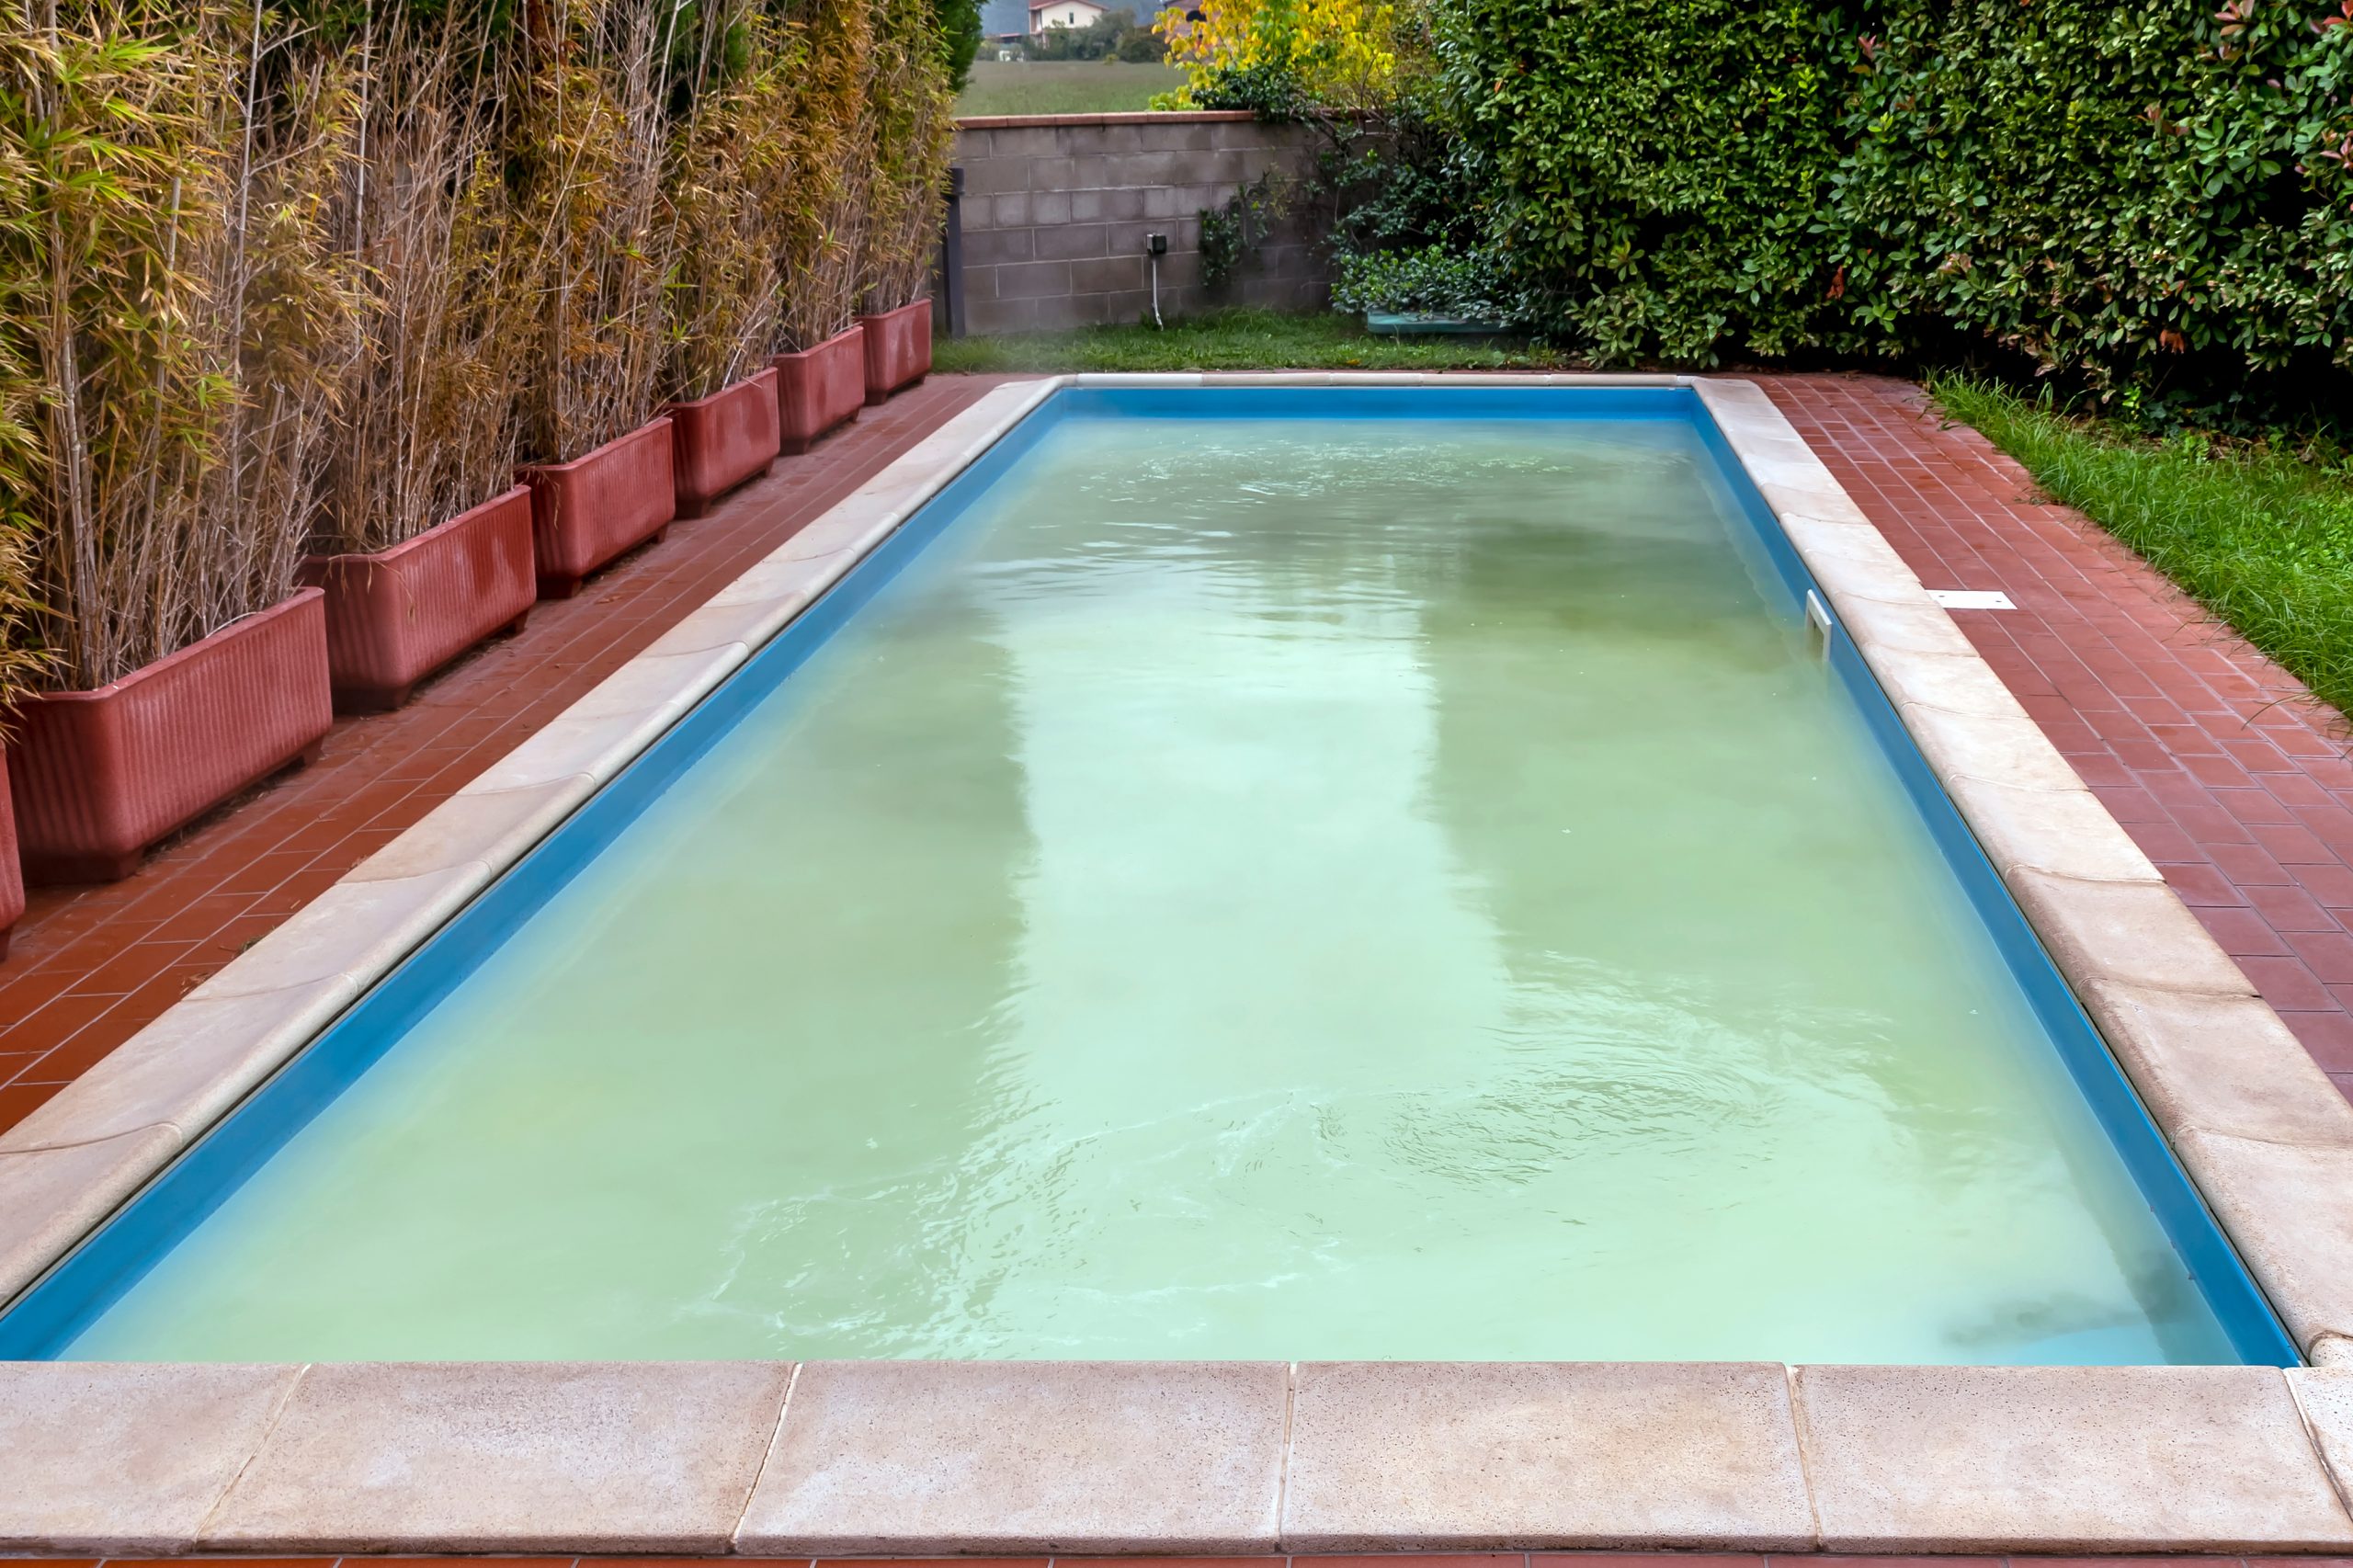 A Pool Owner’s Guide to Replacing Swimming Pool Water